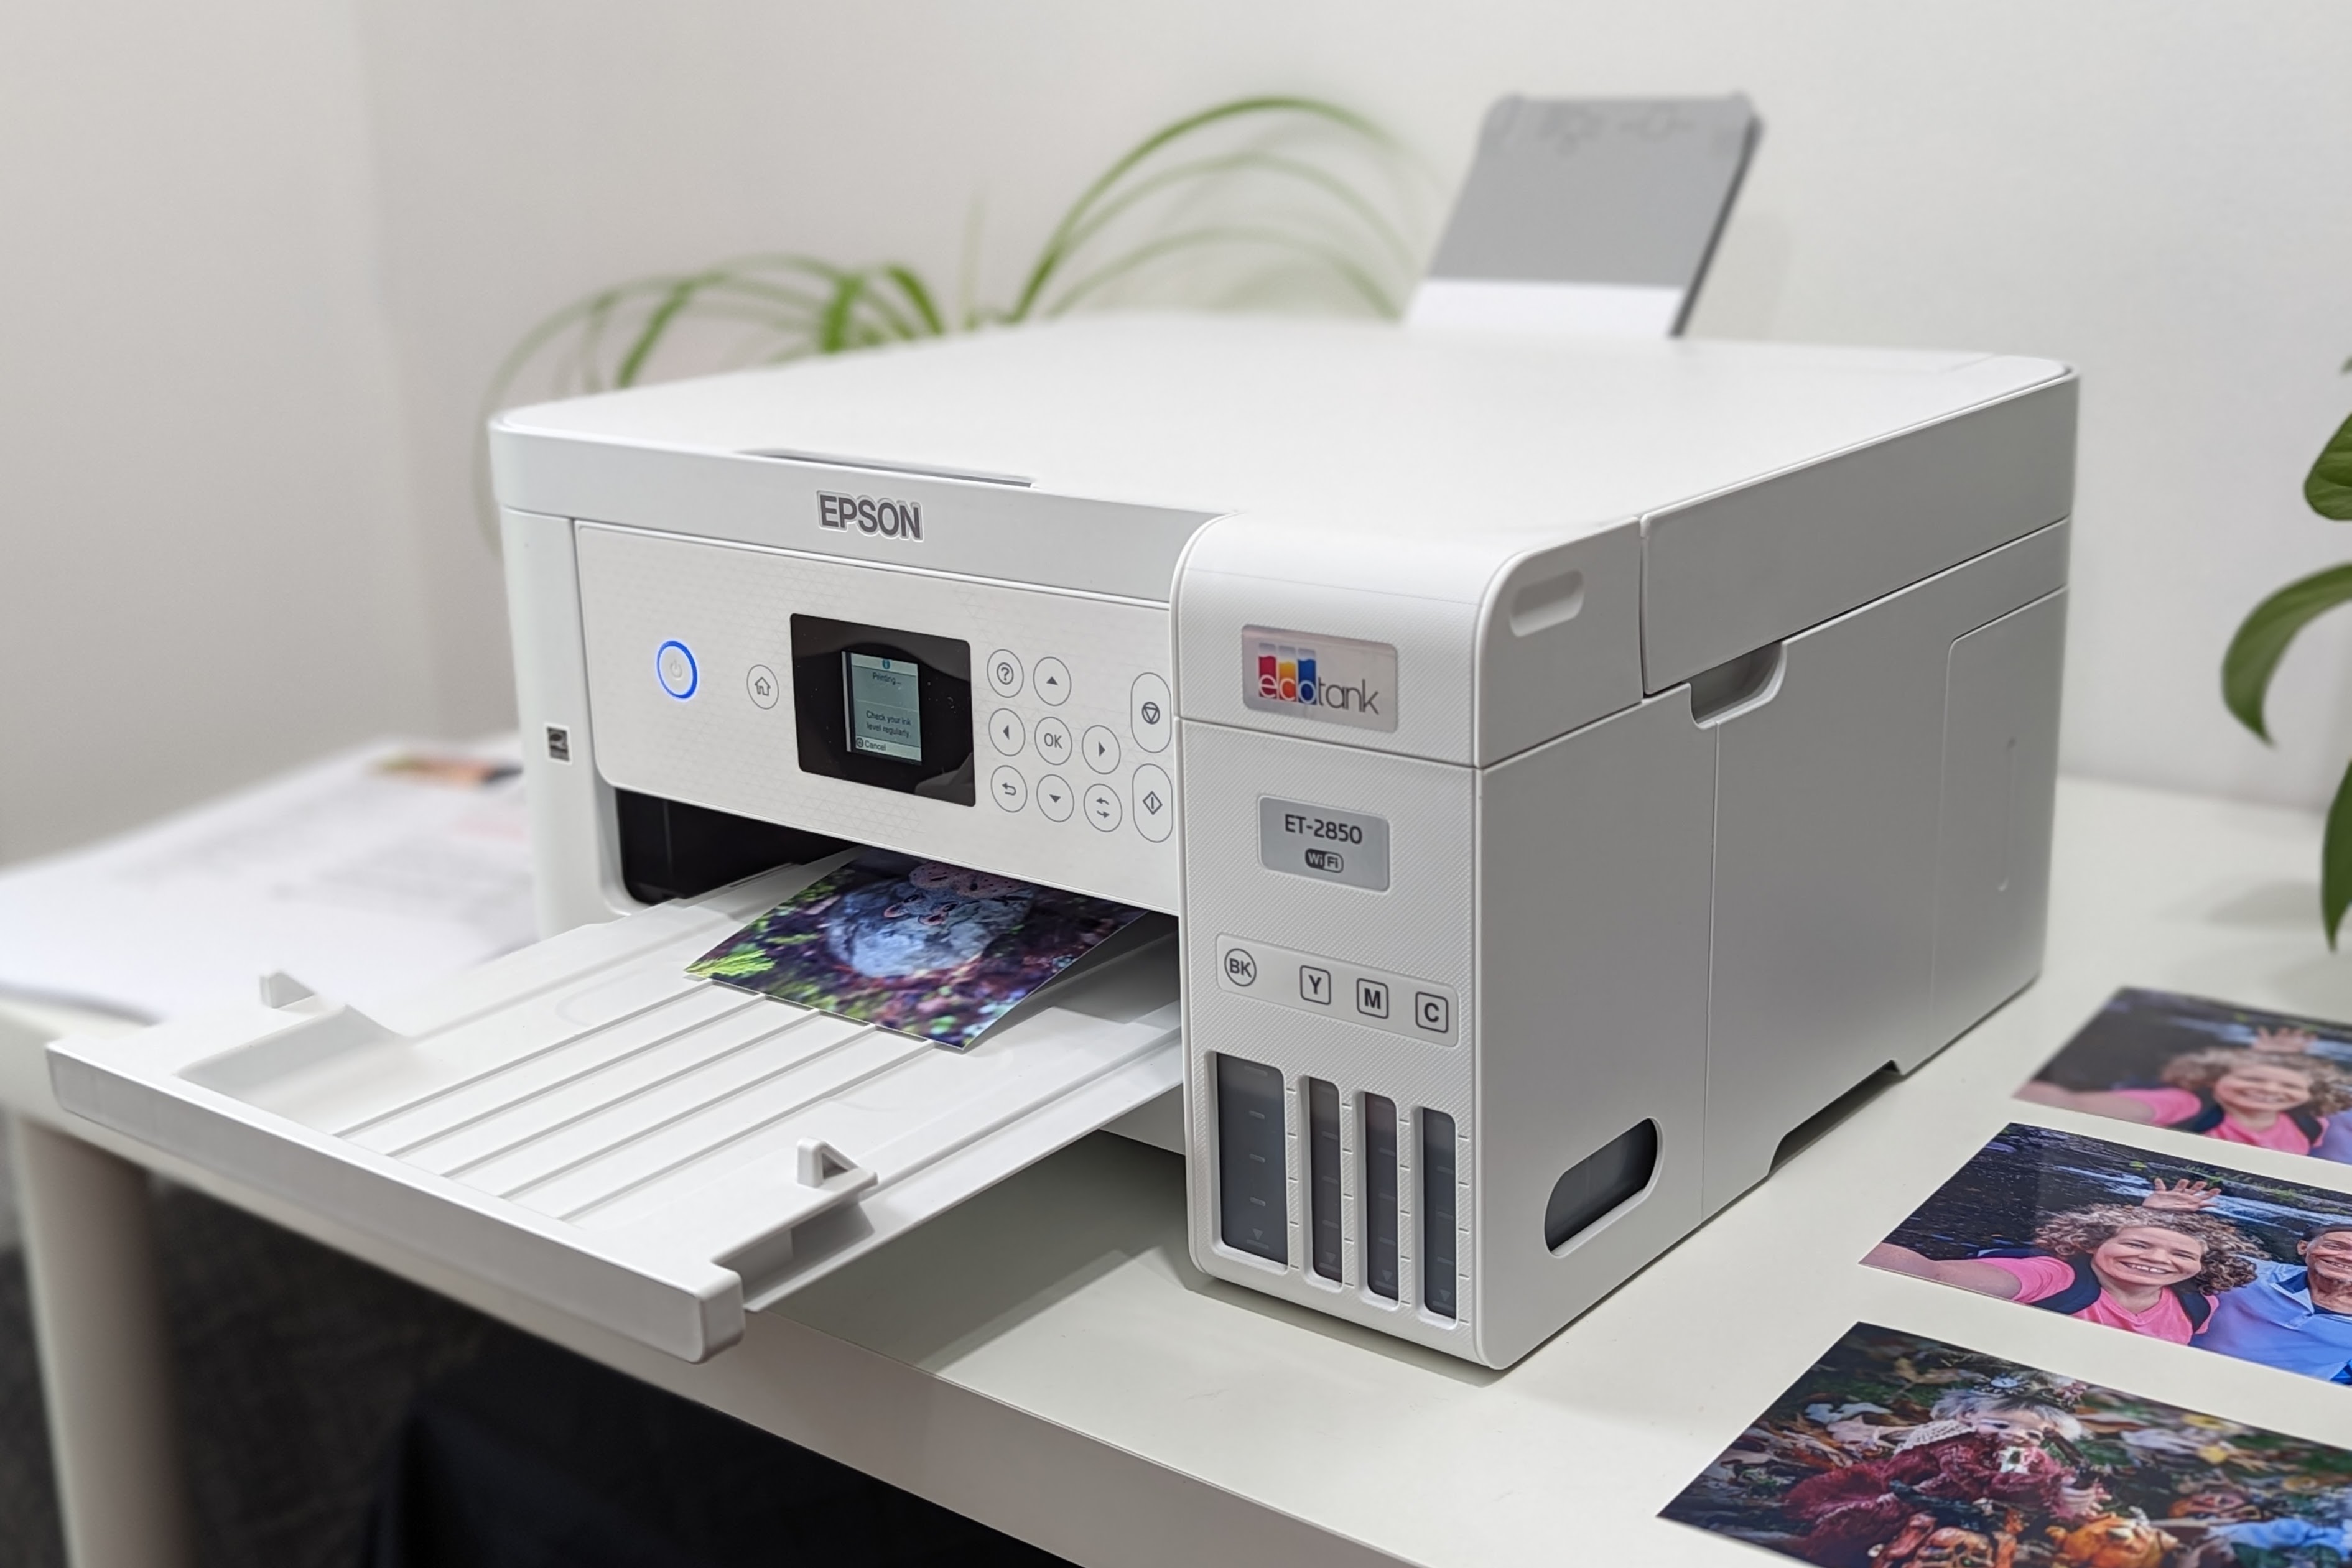 The Epson EcoTank ET-2850 is a versatile all-in-one with good photo print quality.